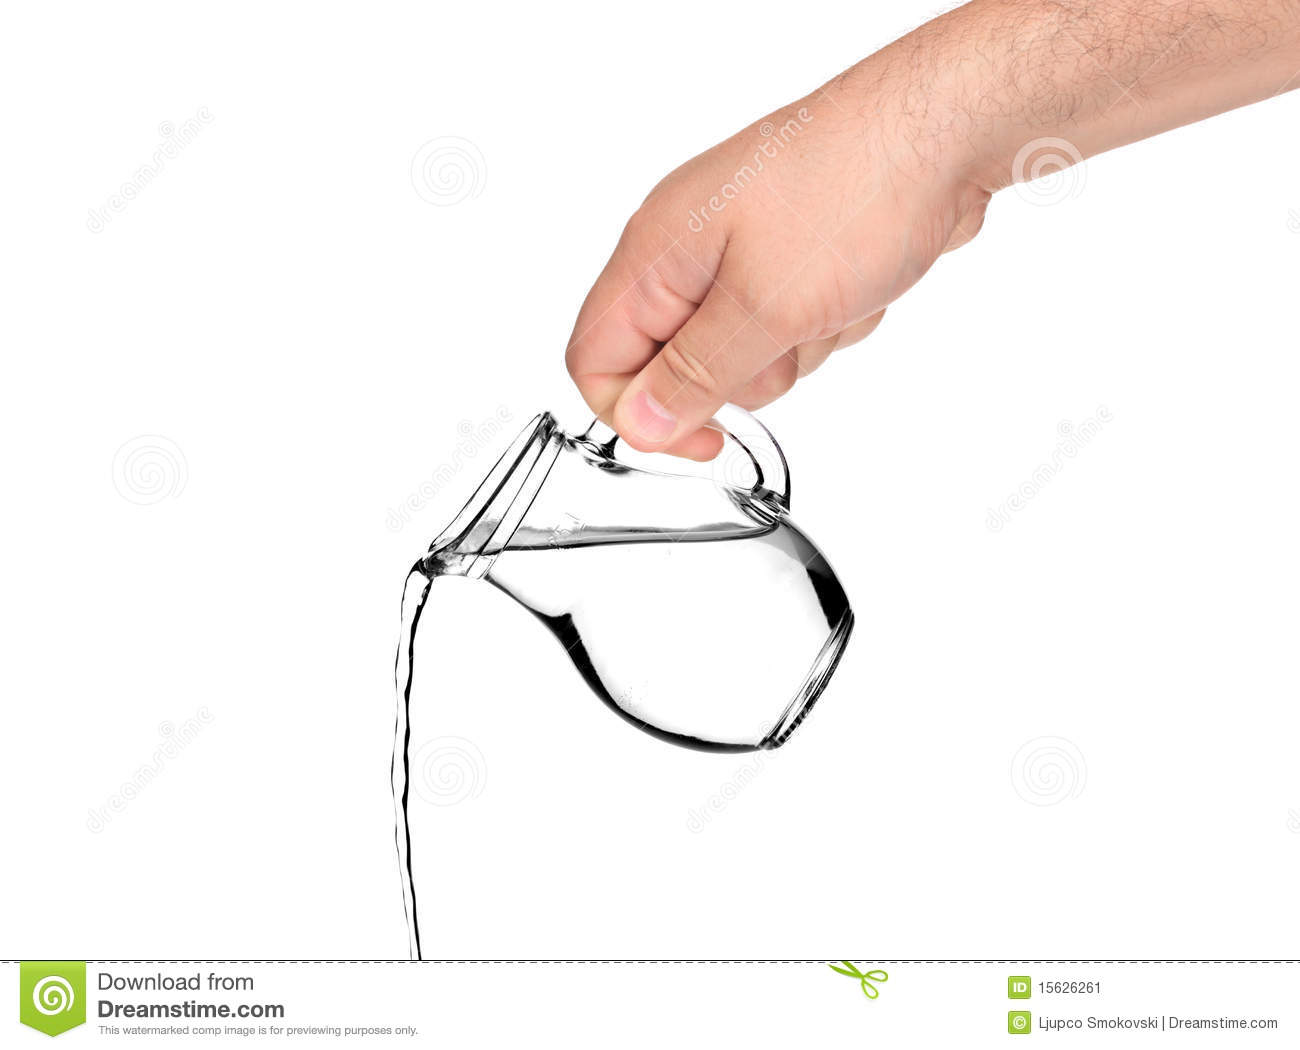 Hand Pouring Water From Pitcher Stock Image   Image  15626261